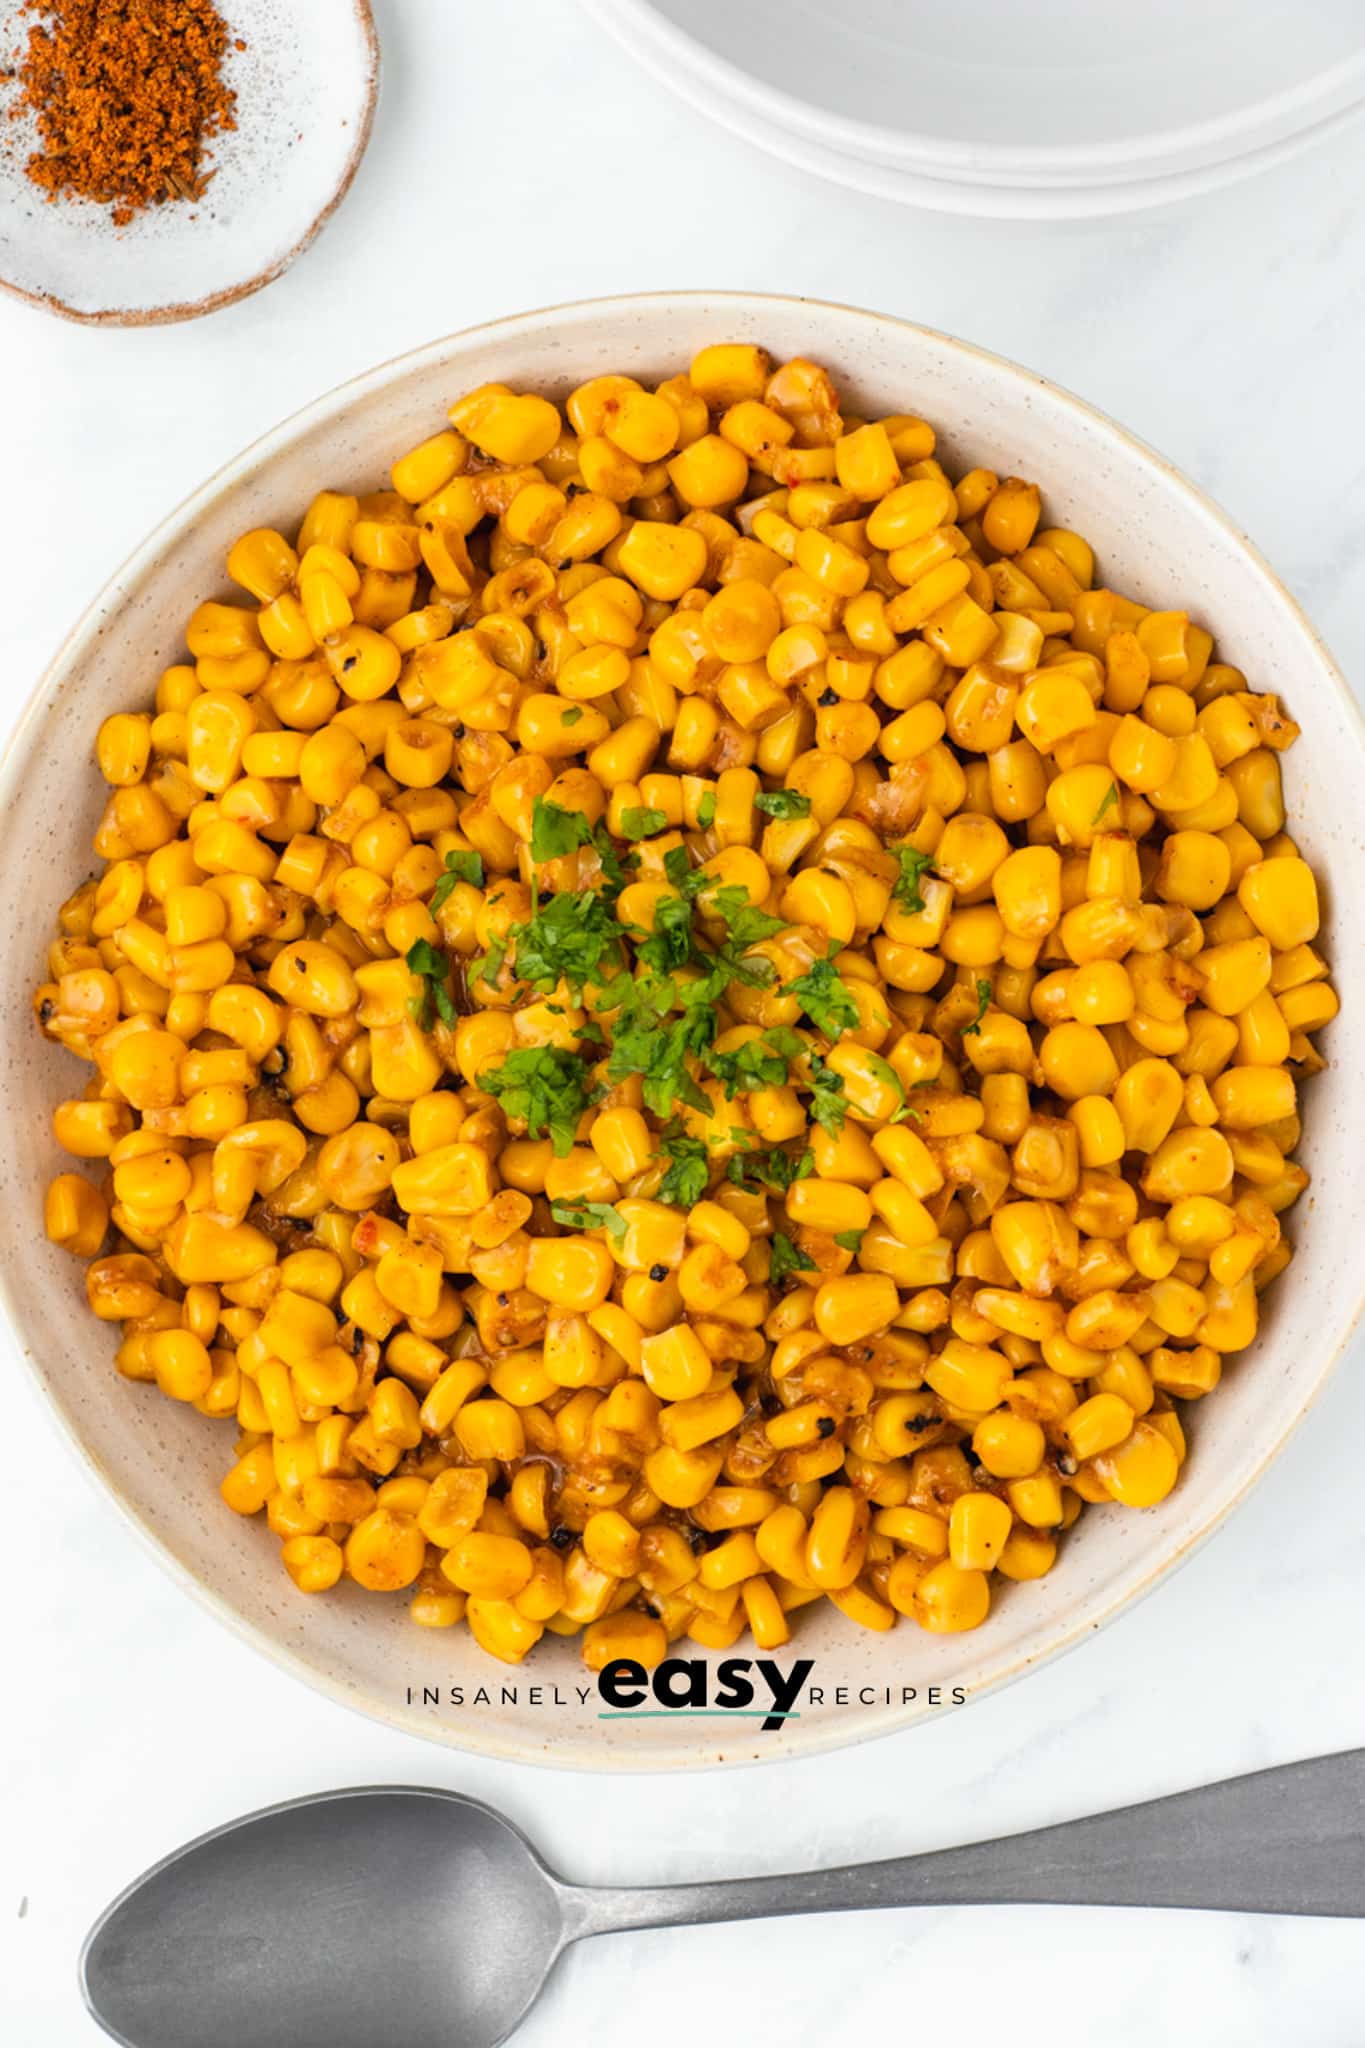 a large ceramic serving bowl filled with yellow corn with cajun seasonings and parsley garnish. There is a spoon under the bowl and a small plate of cajun seasoning above it. View is from overhead.